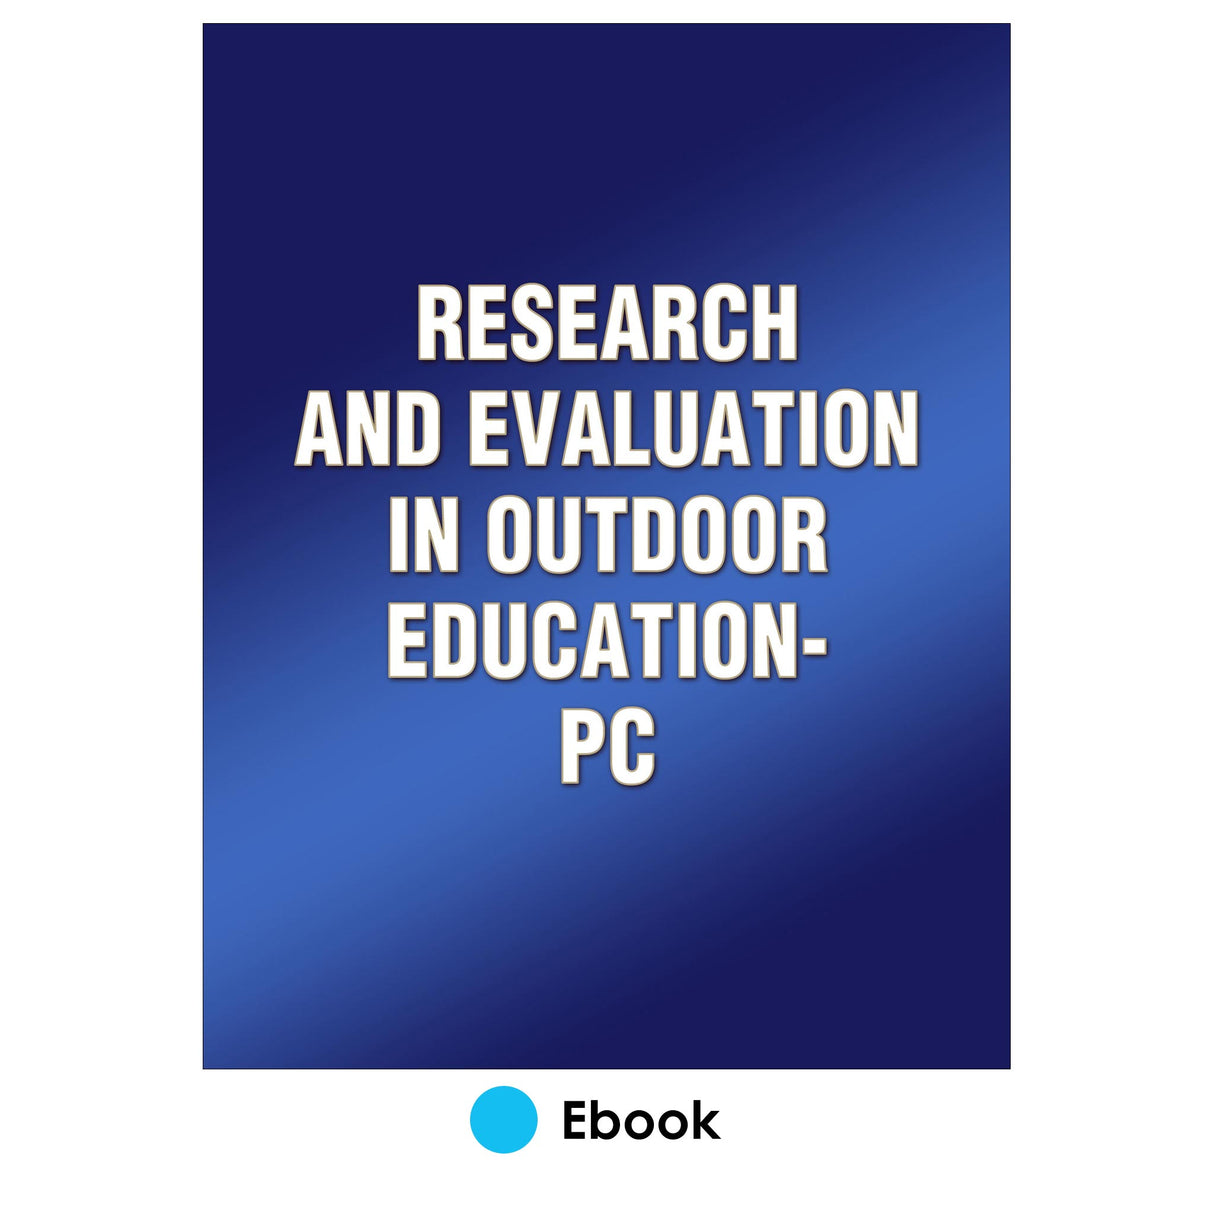 Research and Evaluation in Outdoor Education-PC